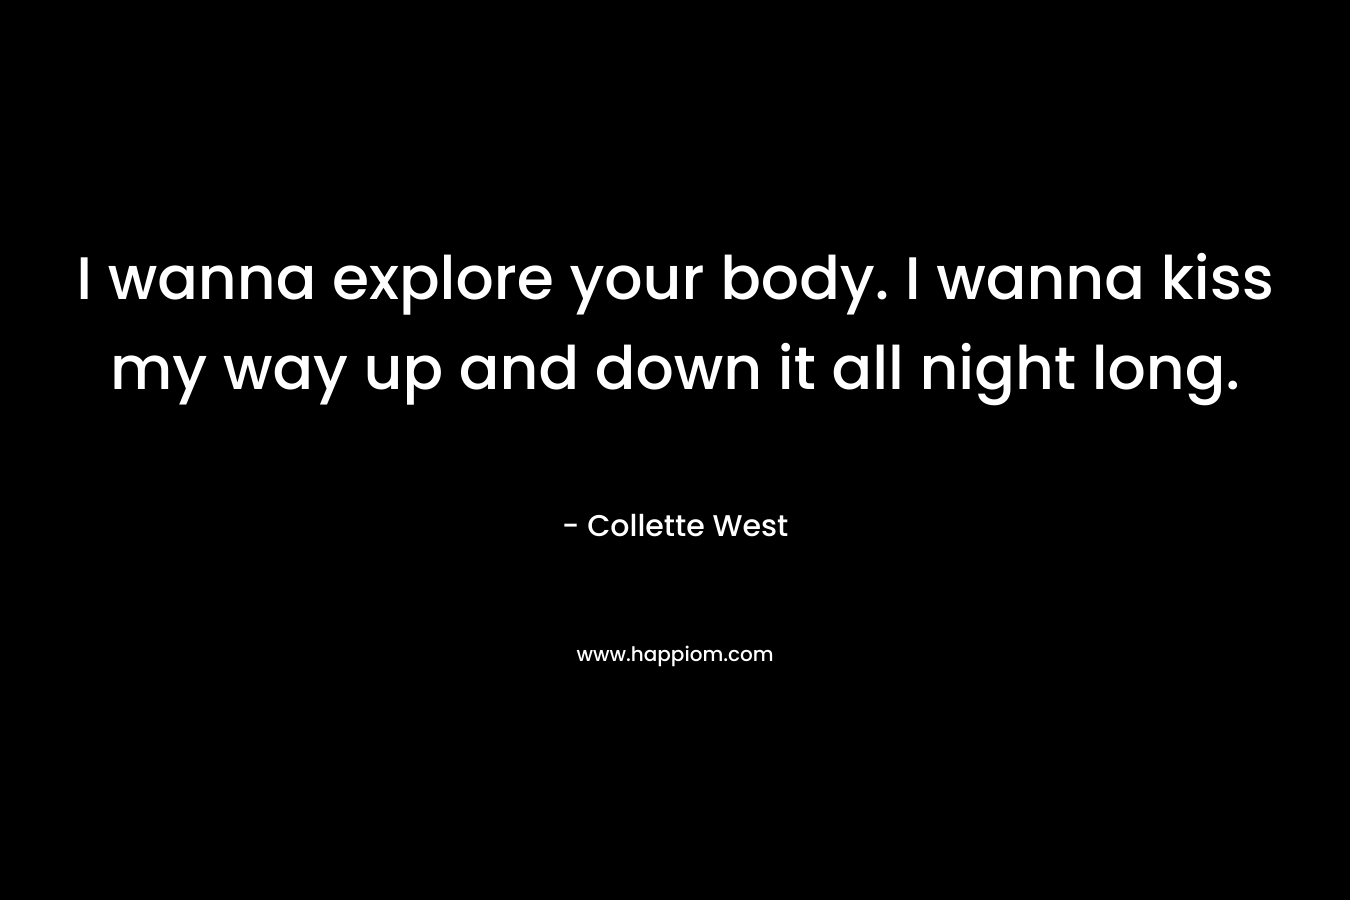 I wanna explore your body. I wanna kiss my way up and down it all night long. – Collette West